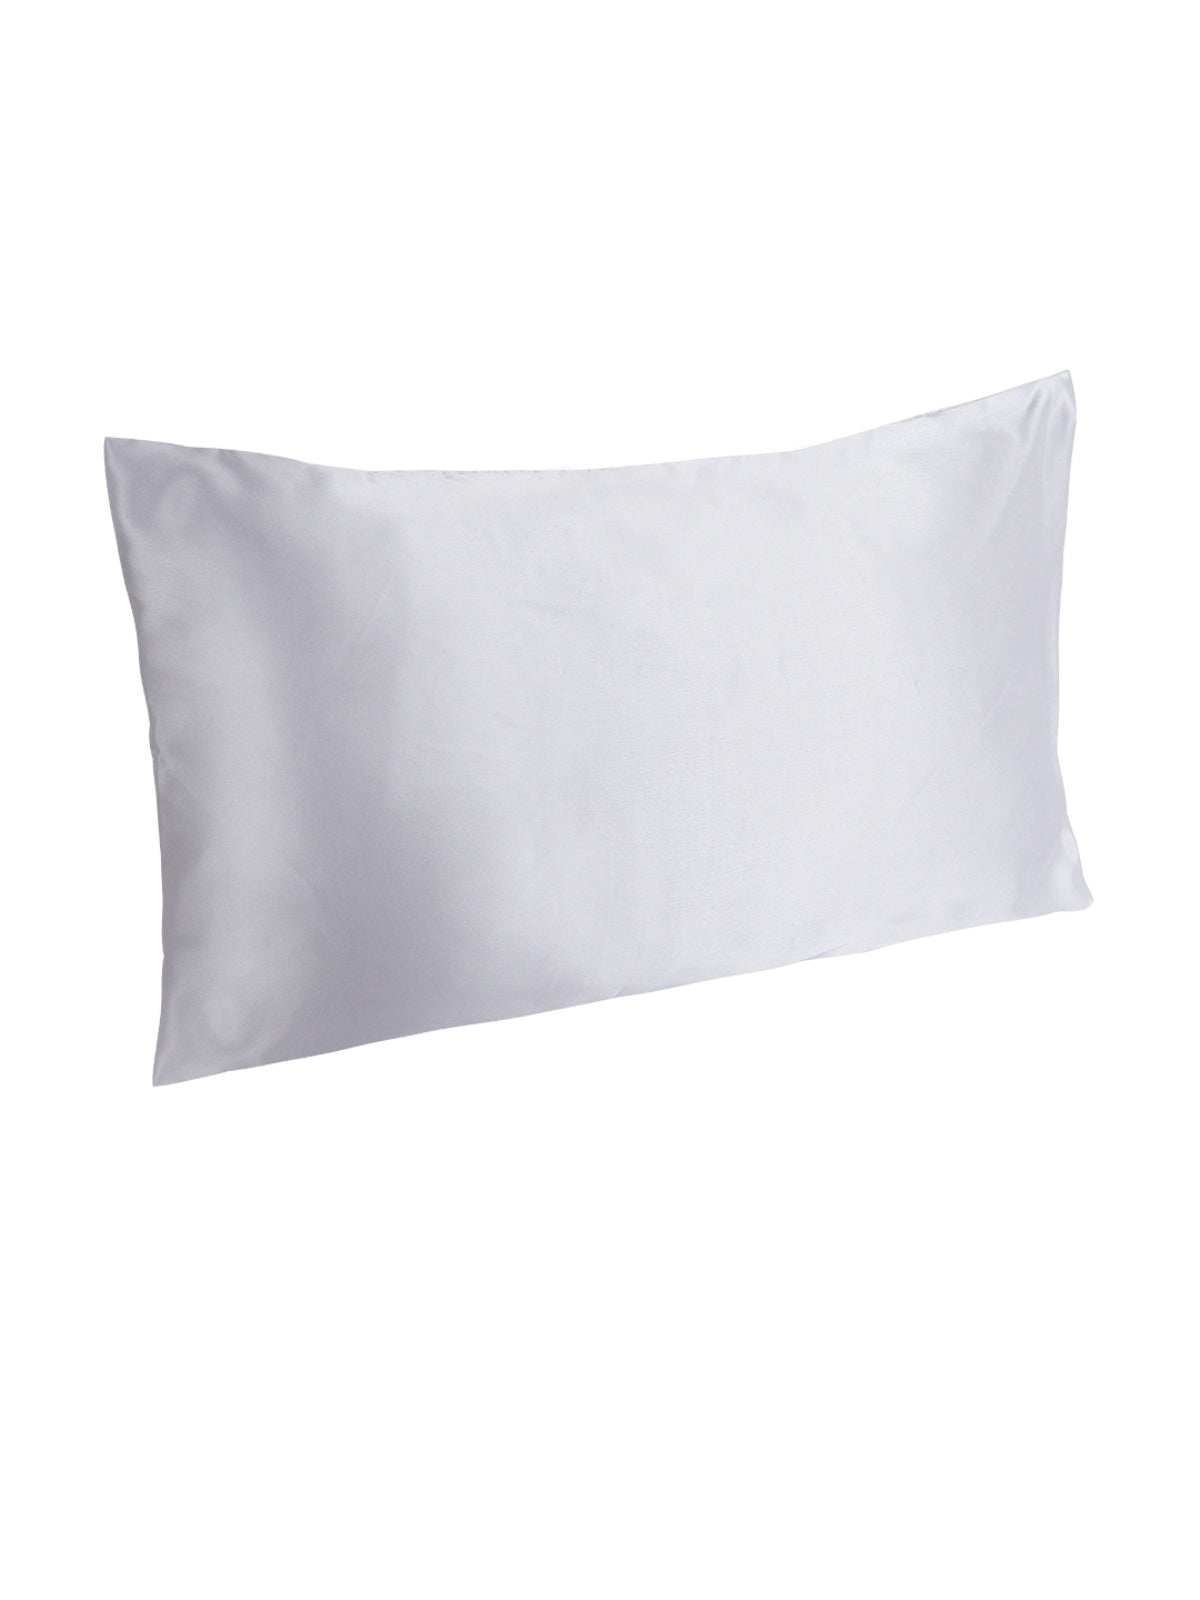 White Set of 2 Solid Patterned Pillow Covers